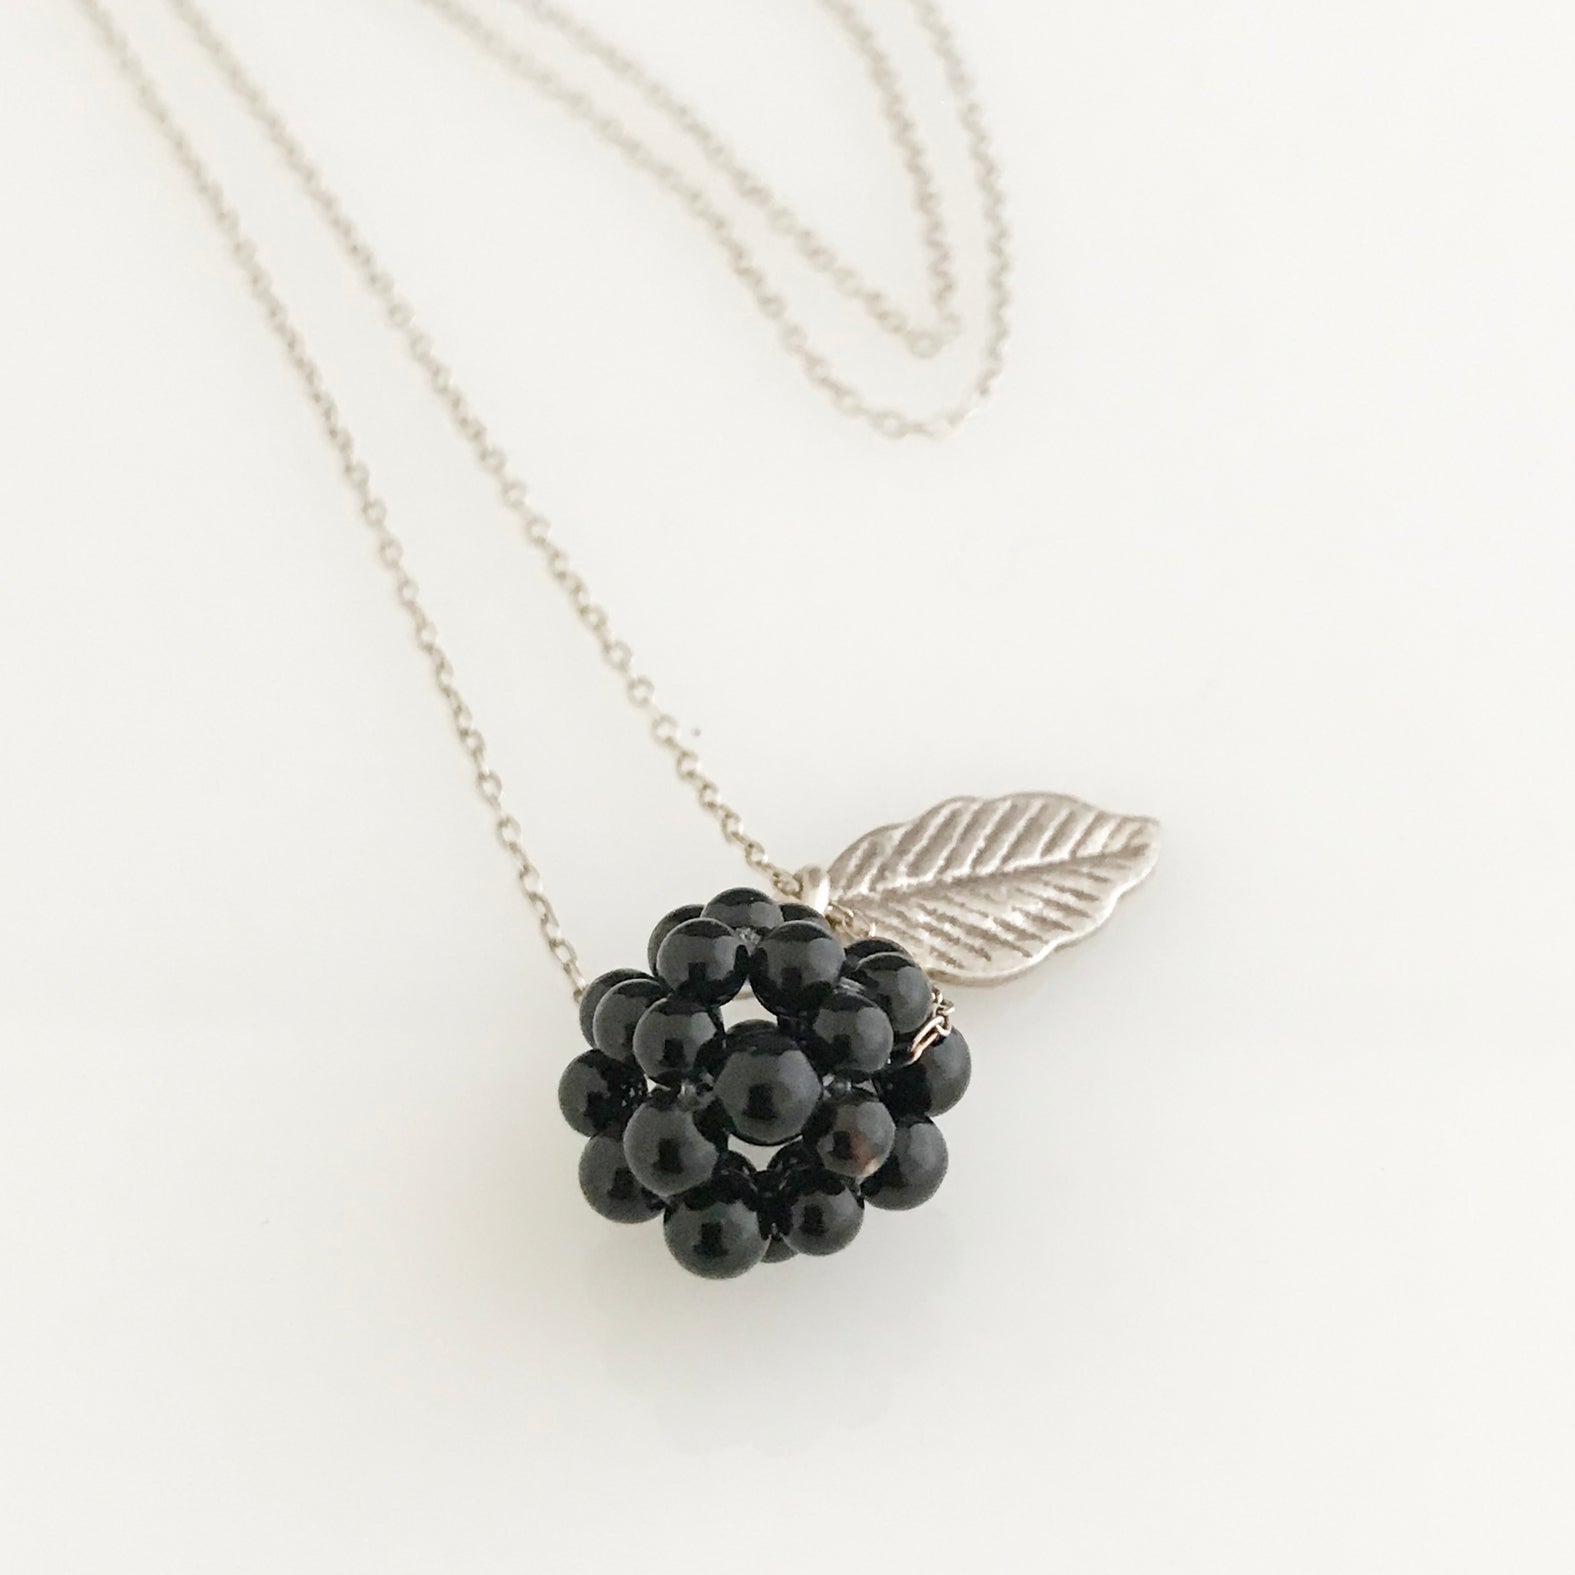 Onyx cluster with silver leaf necklace